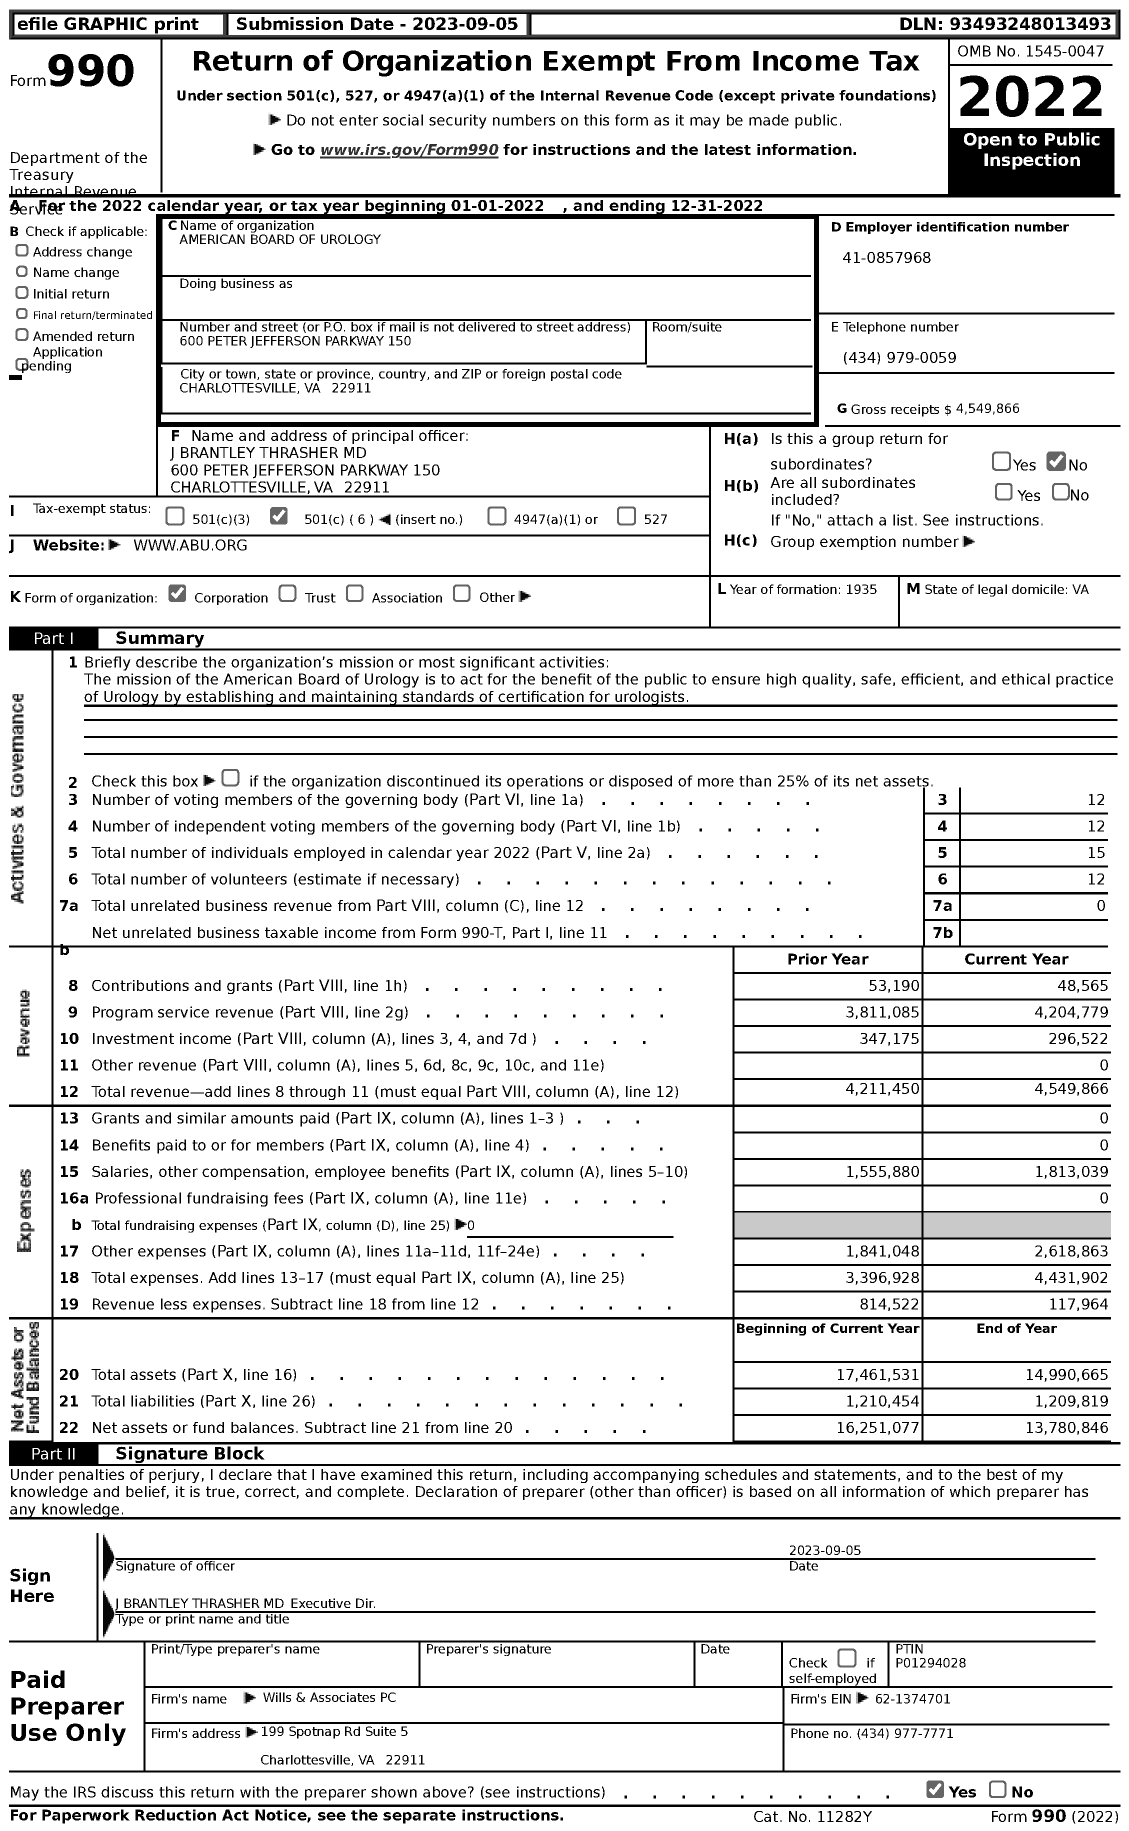 Image of first page of 2022 Form 990 for American Board of Urology (ABU)